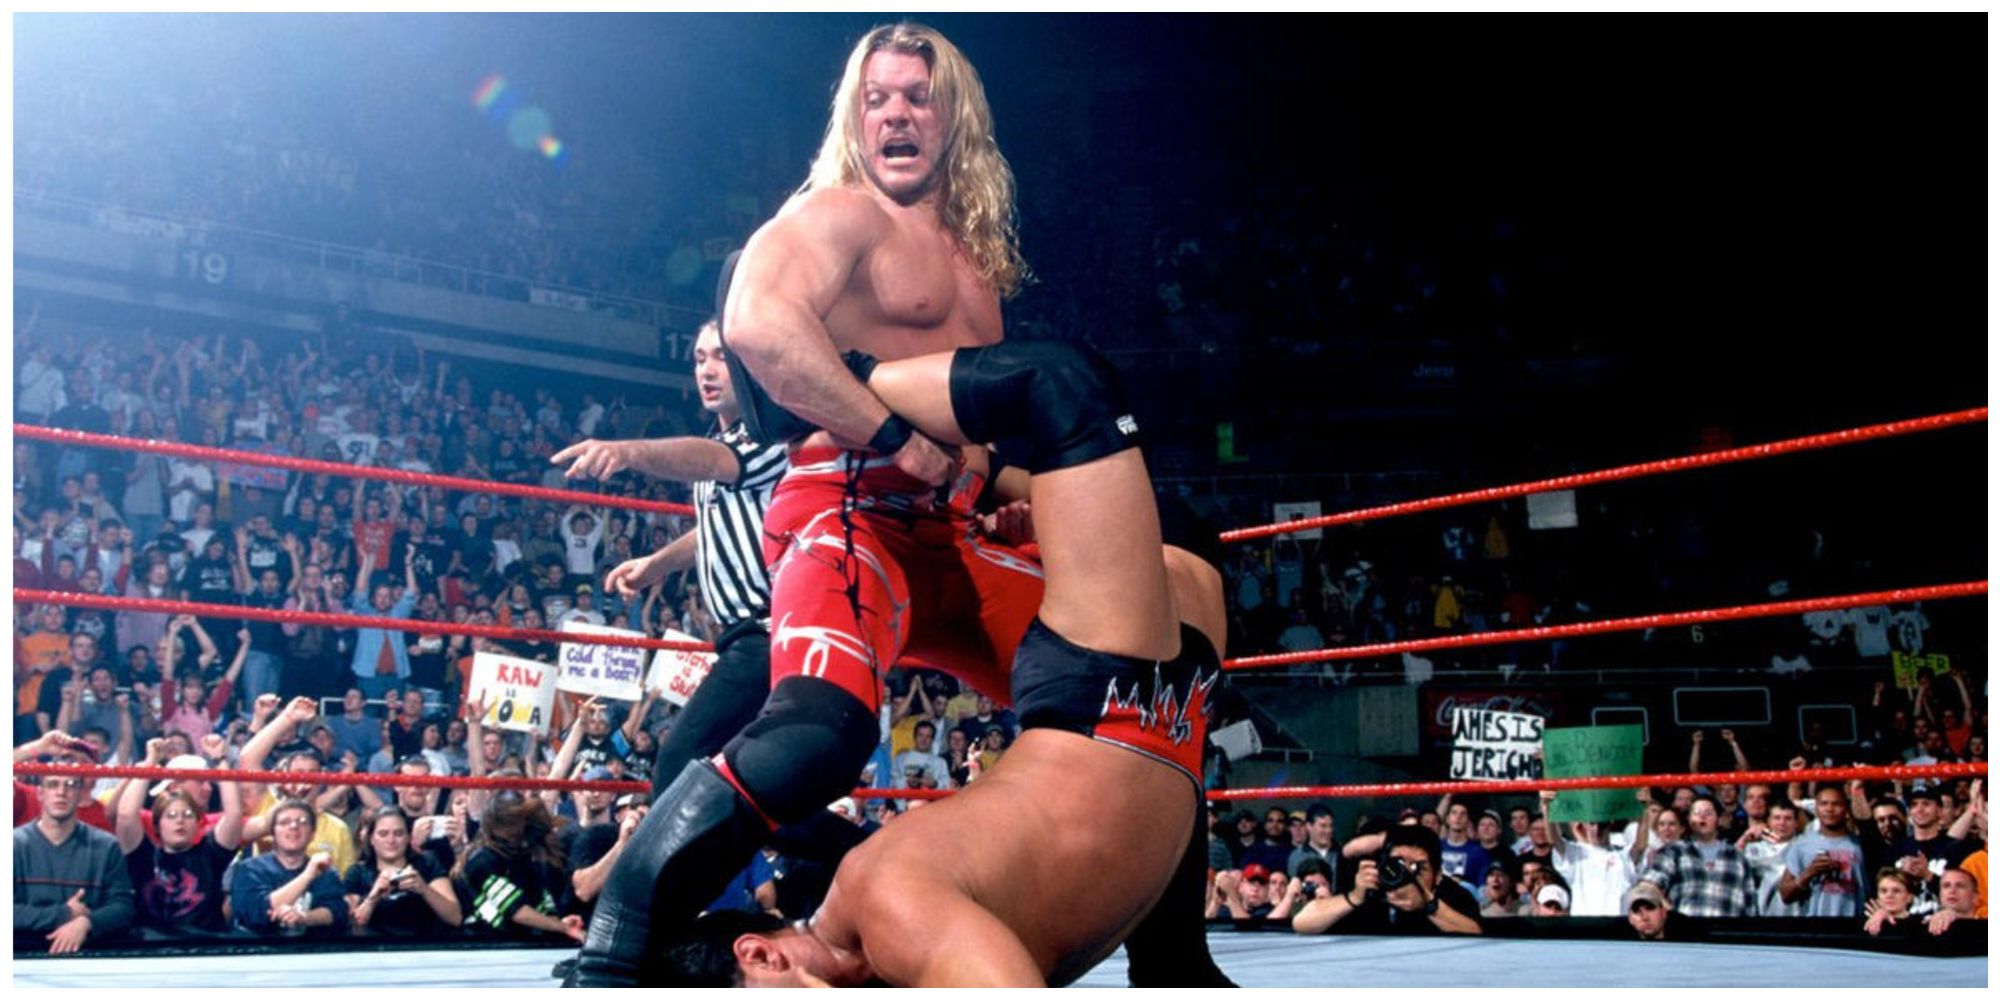 Chris Jericho using his signature move the Walls of Jericho on another wrestler in a WWE match